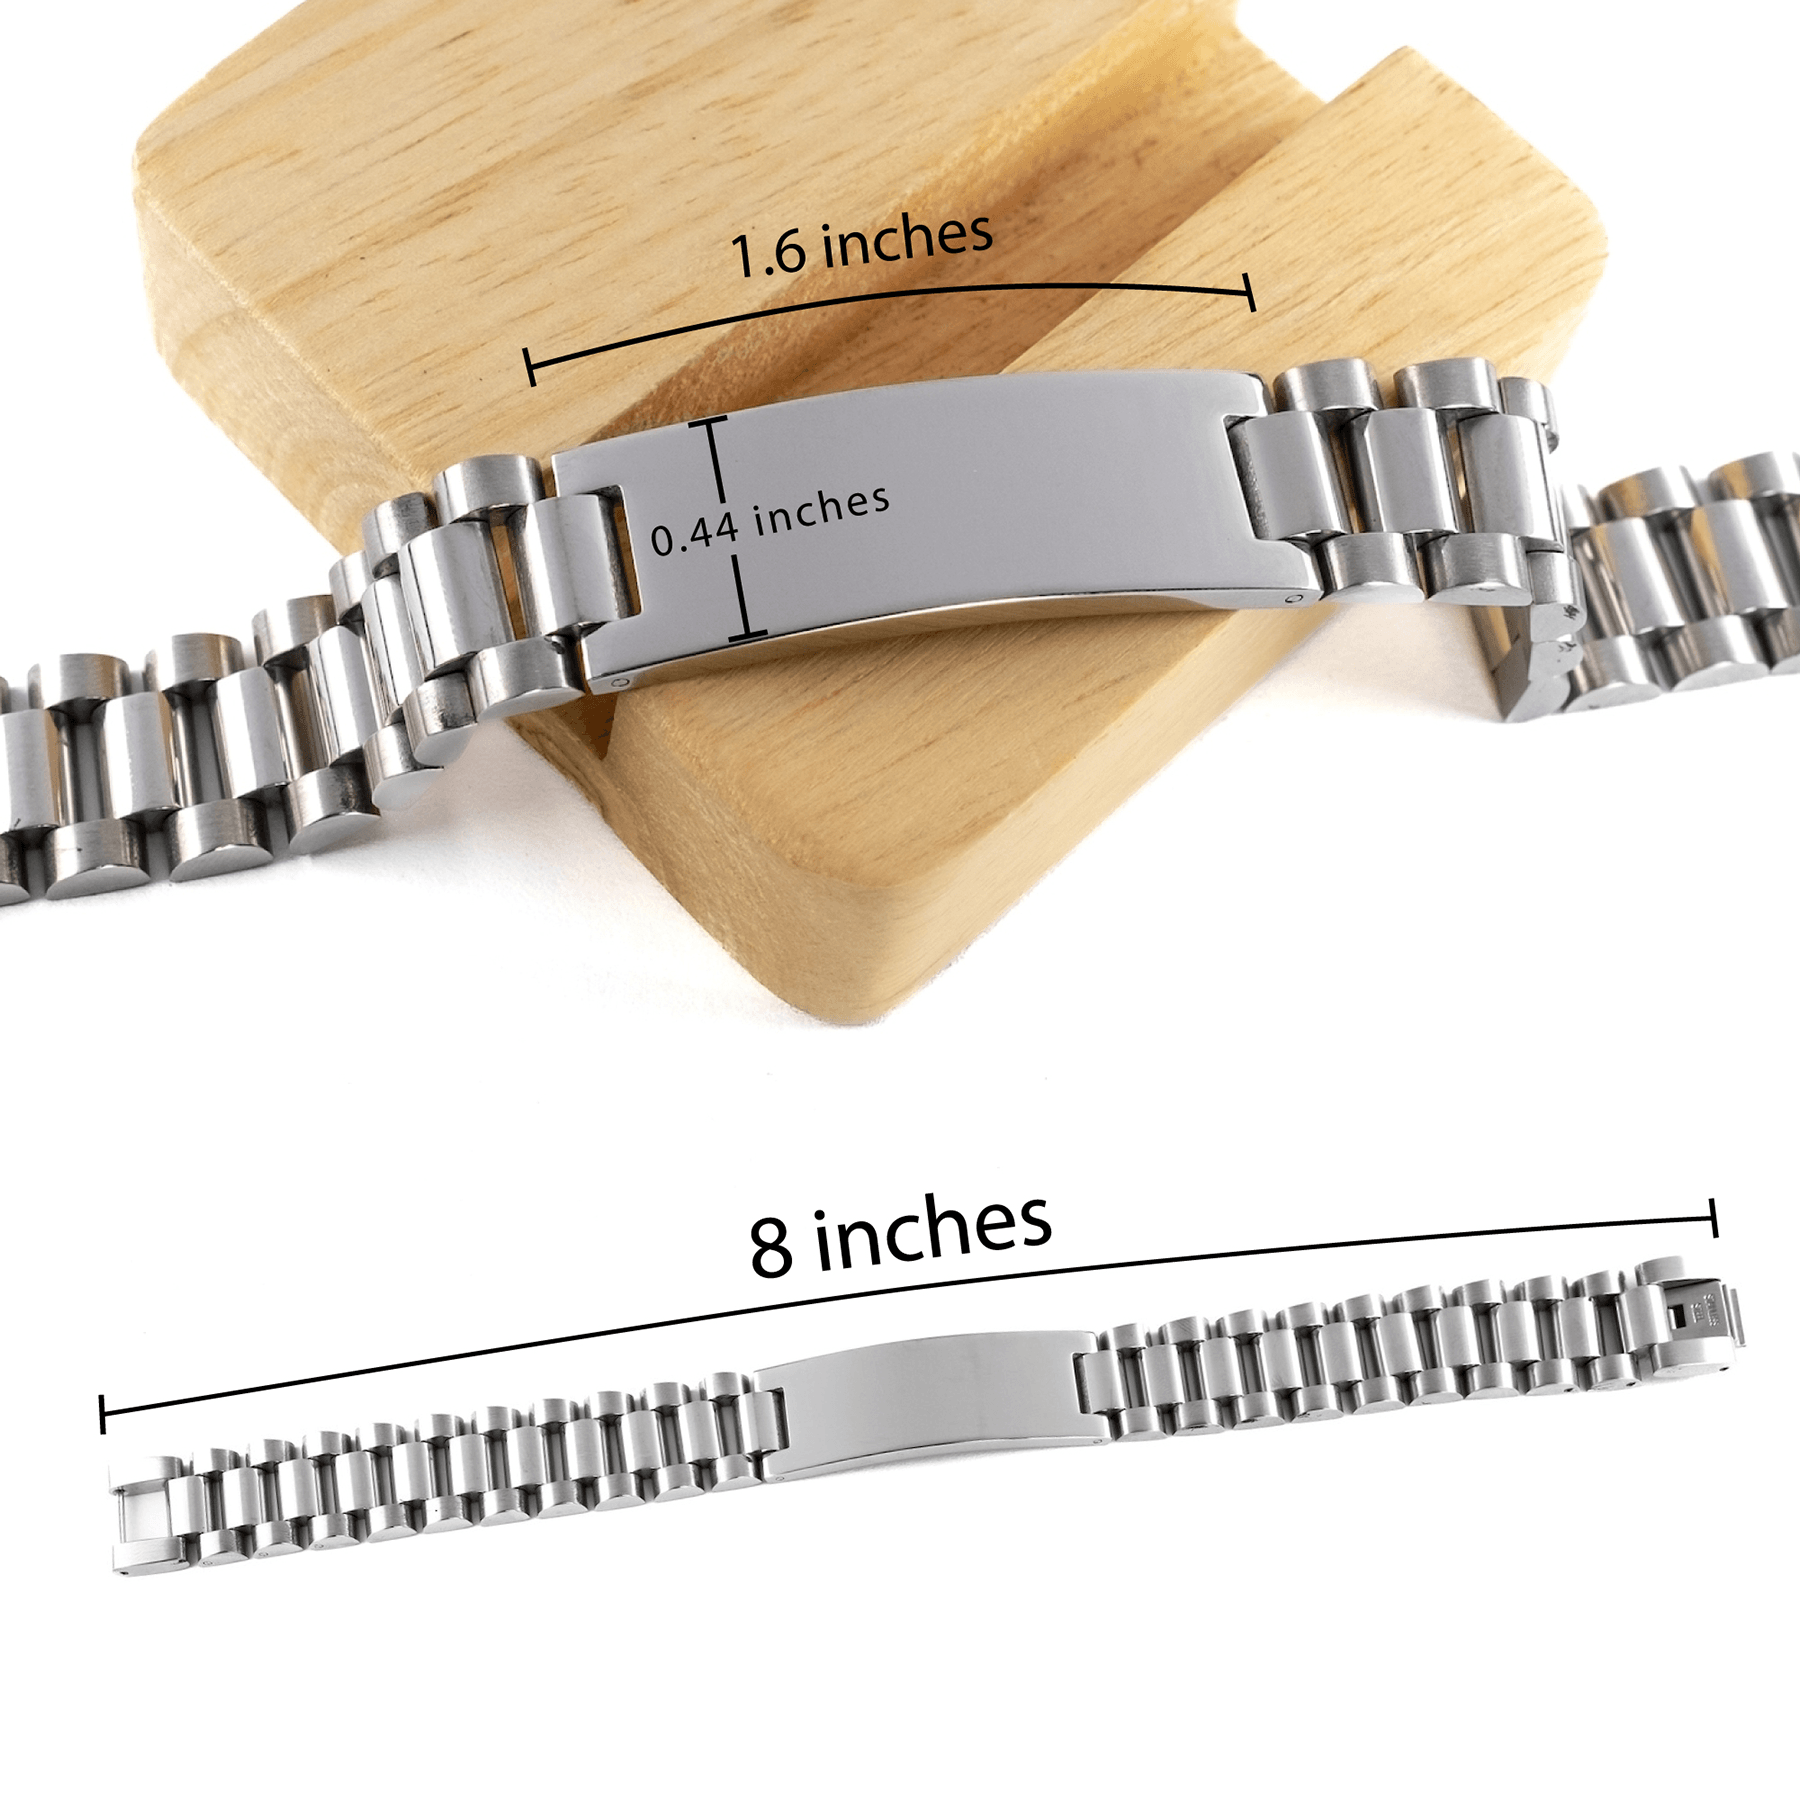 Remarkable Orthodontist Gifts, Your dedication and hard work, Inspirational Birthday Christmas Unique Ladder Stainless Steel Bracelet For Orthodontist, Coworkers, Men, Women, Friends - Mallard Moon Gift Shop